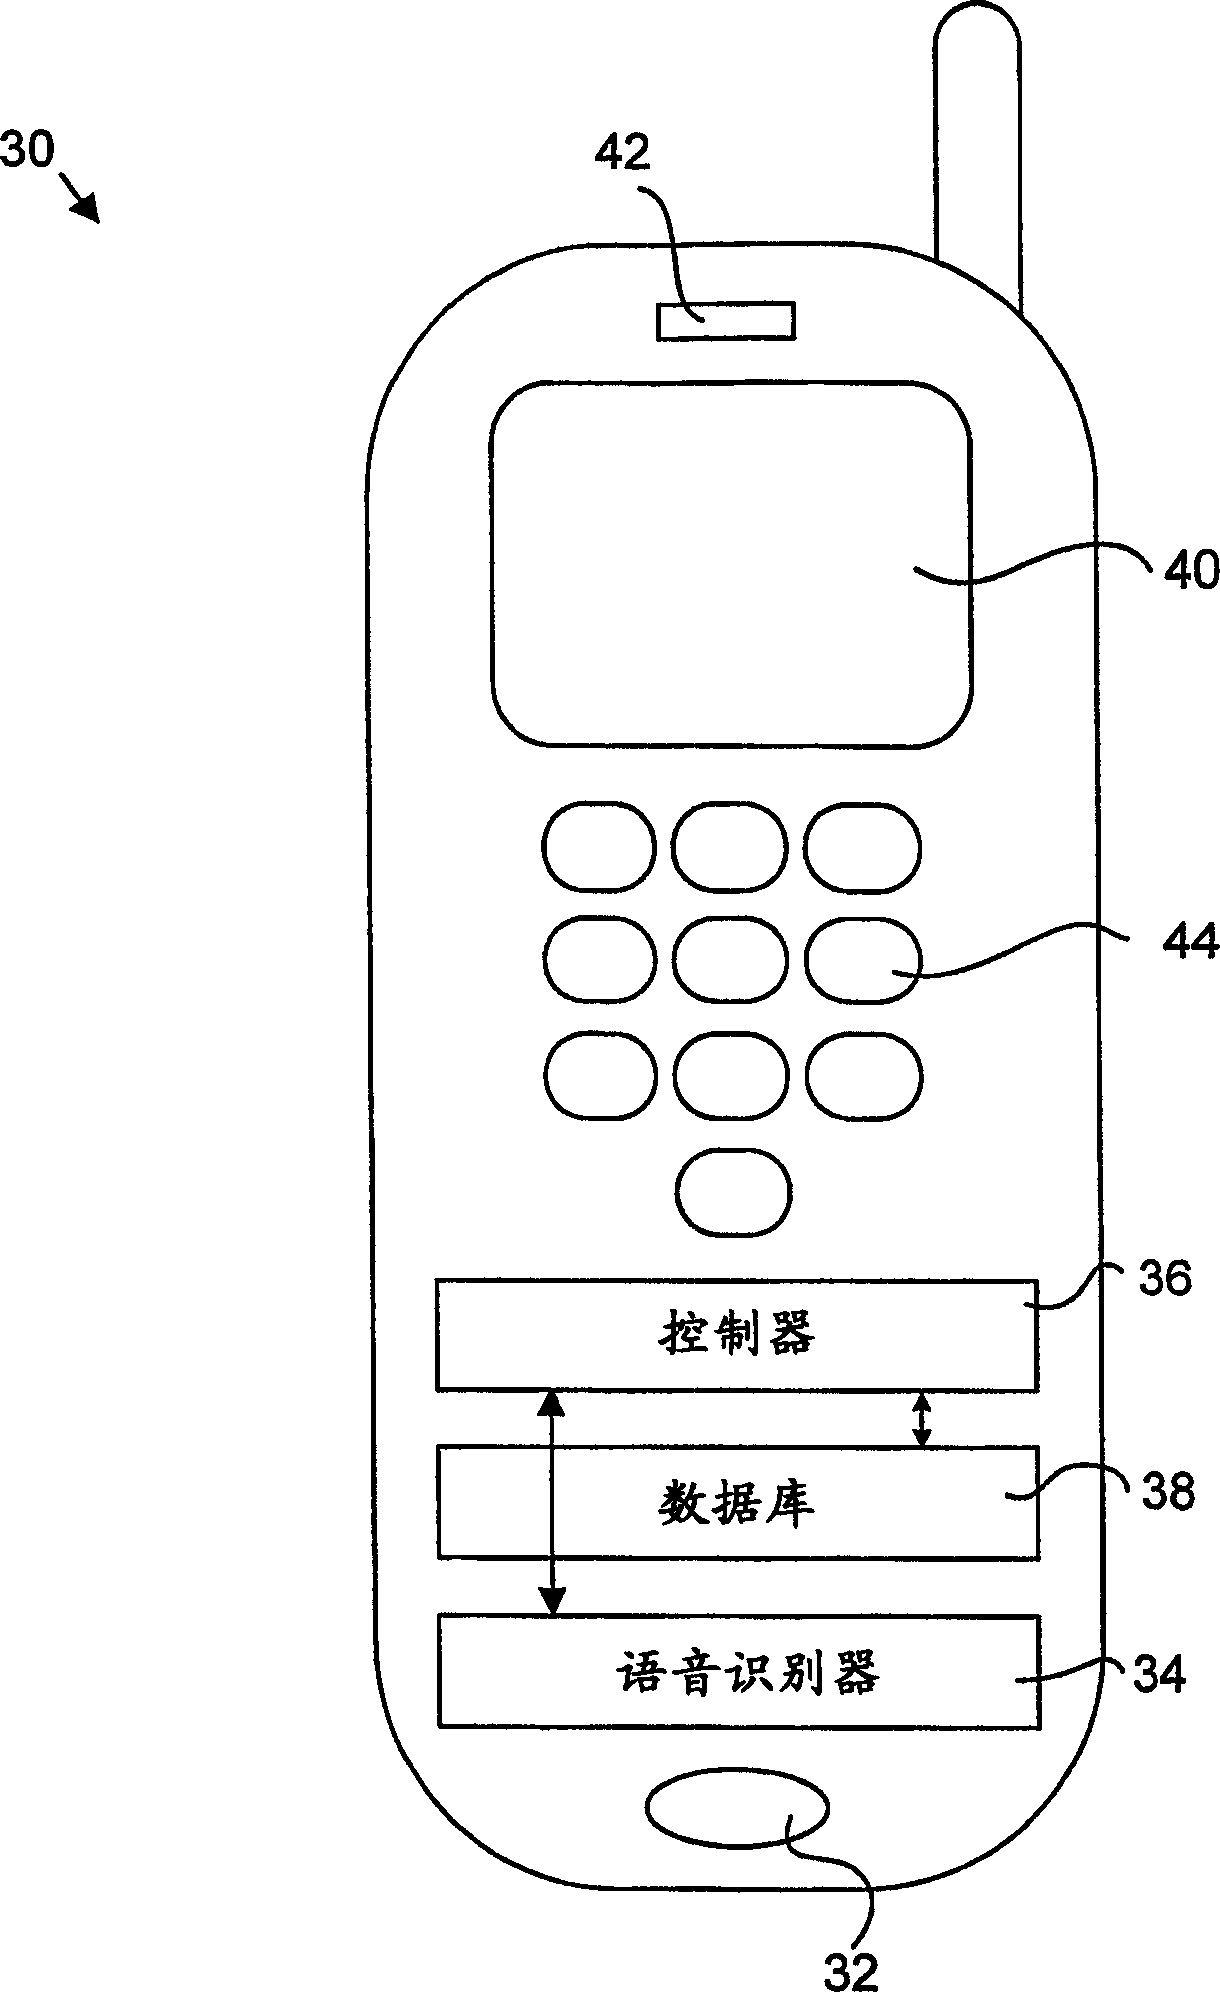 Method and apparatus for improved speech recognition with supplementary information